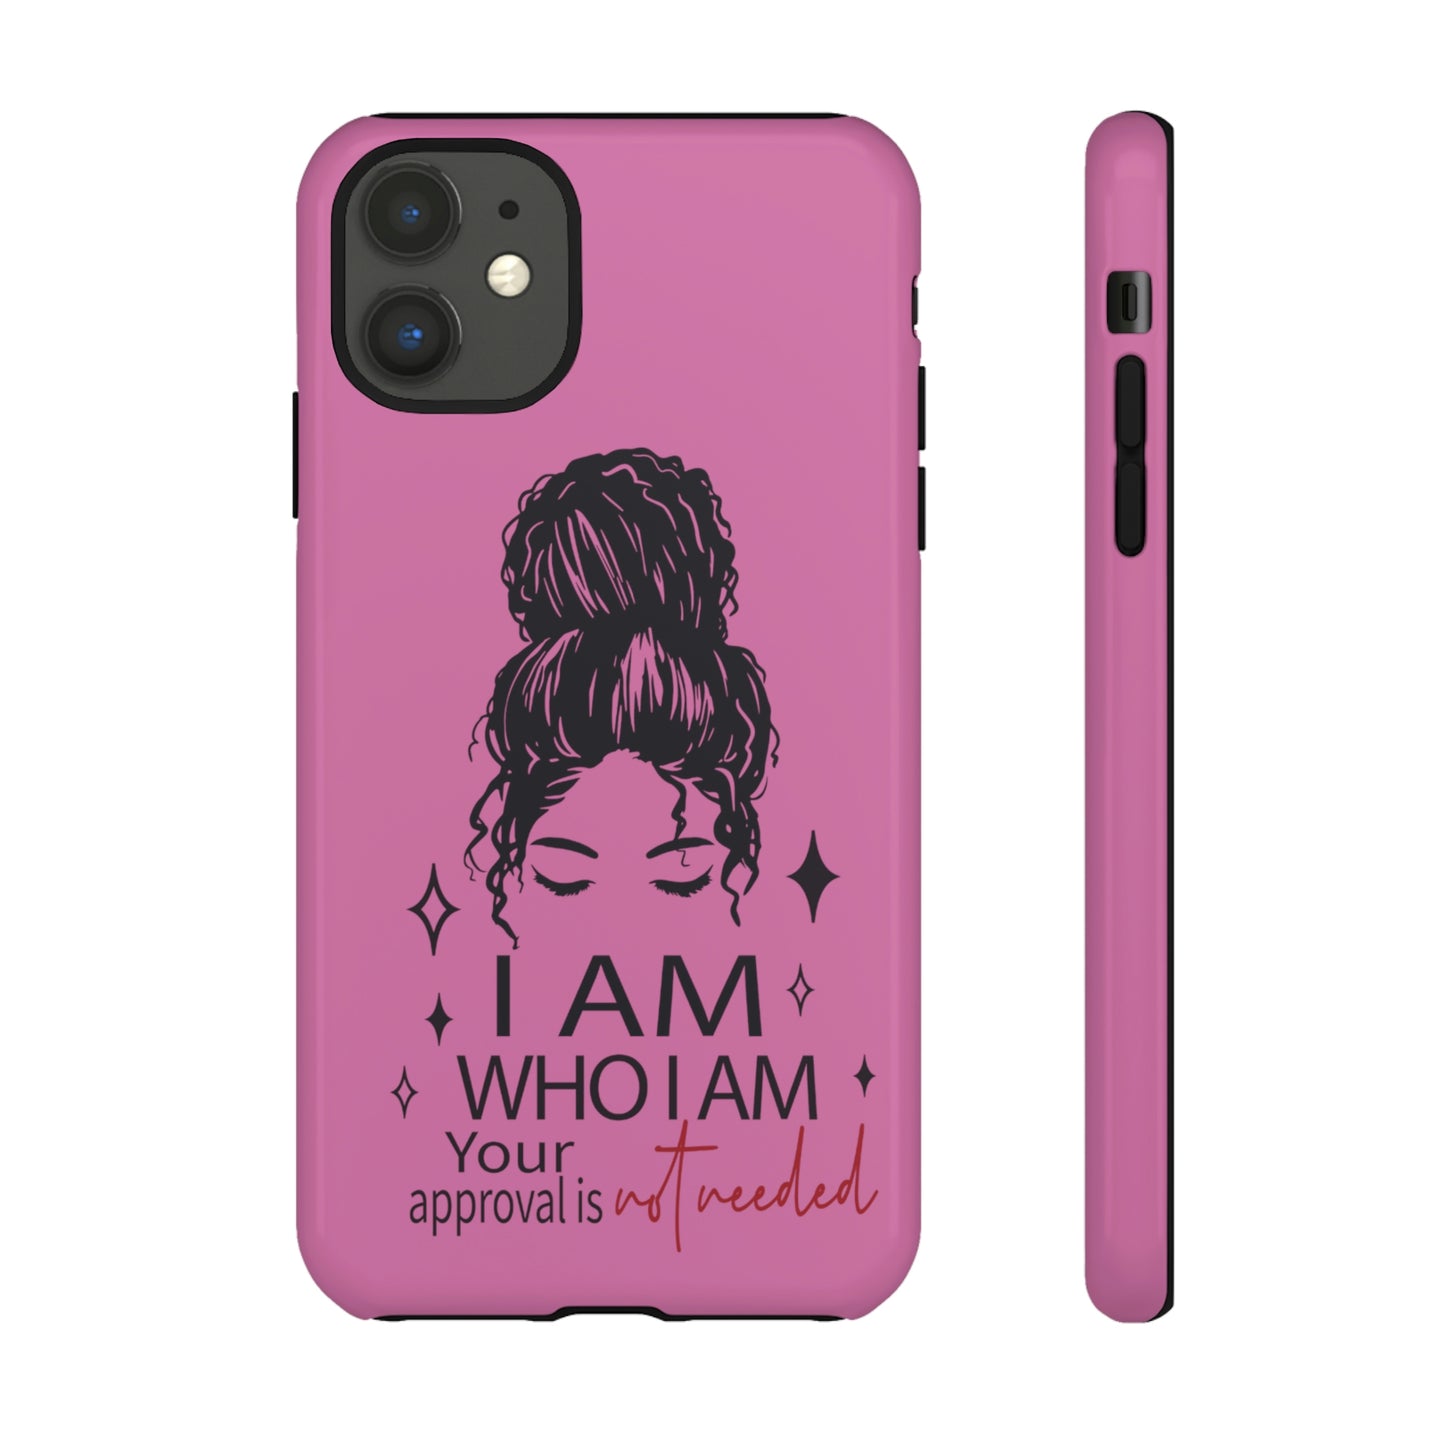 A self love journey iphone case